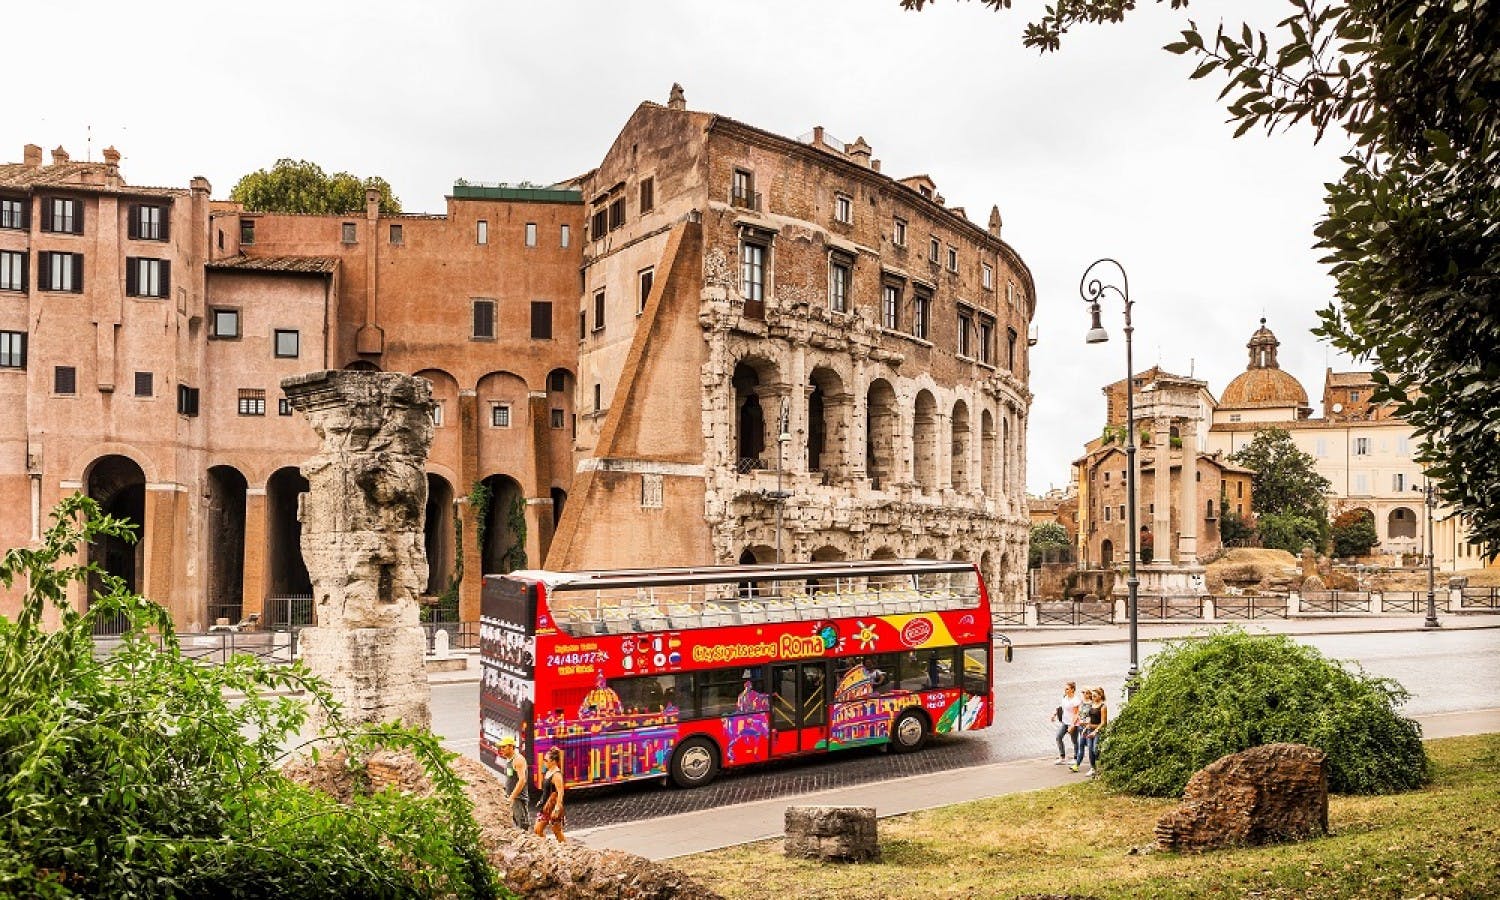 City Sightseeing Rome Hop-on Hop-off bustour Ticket voor 24, 48 of 72 uur